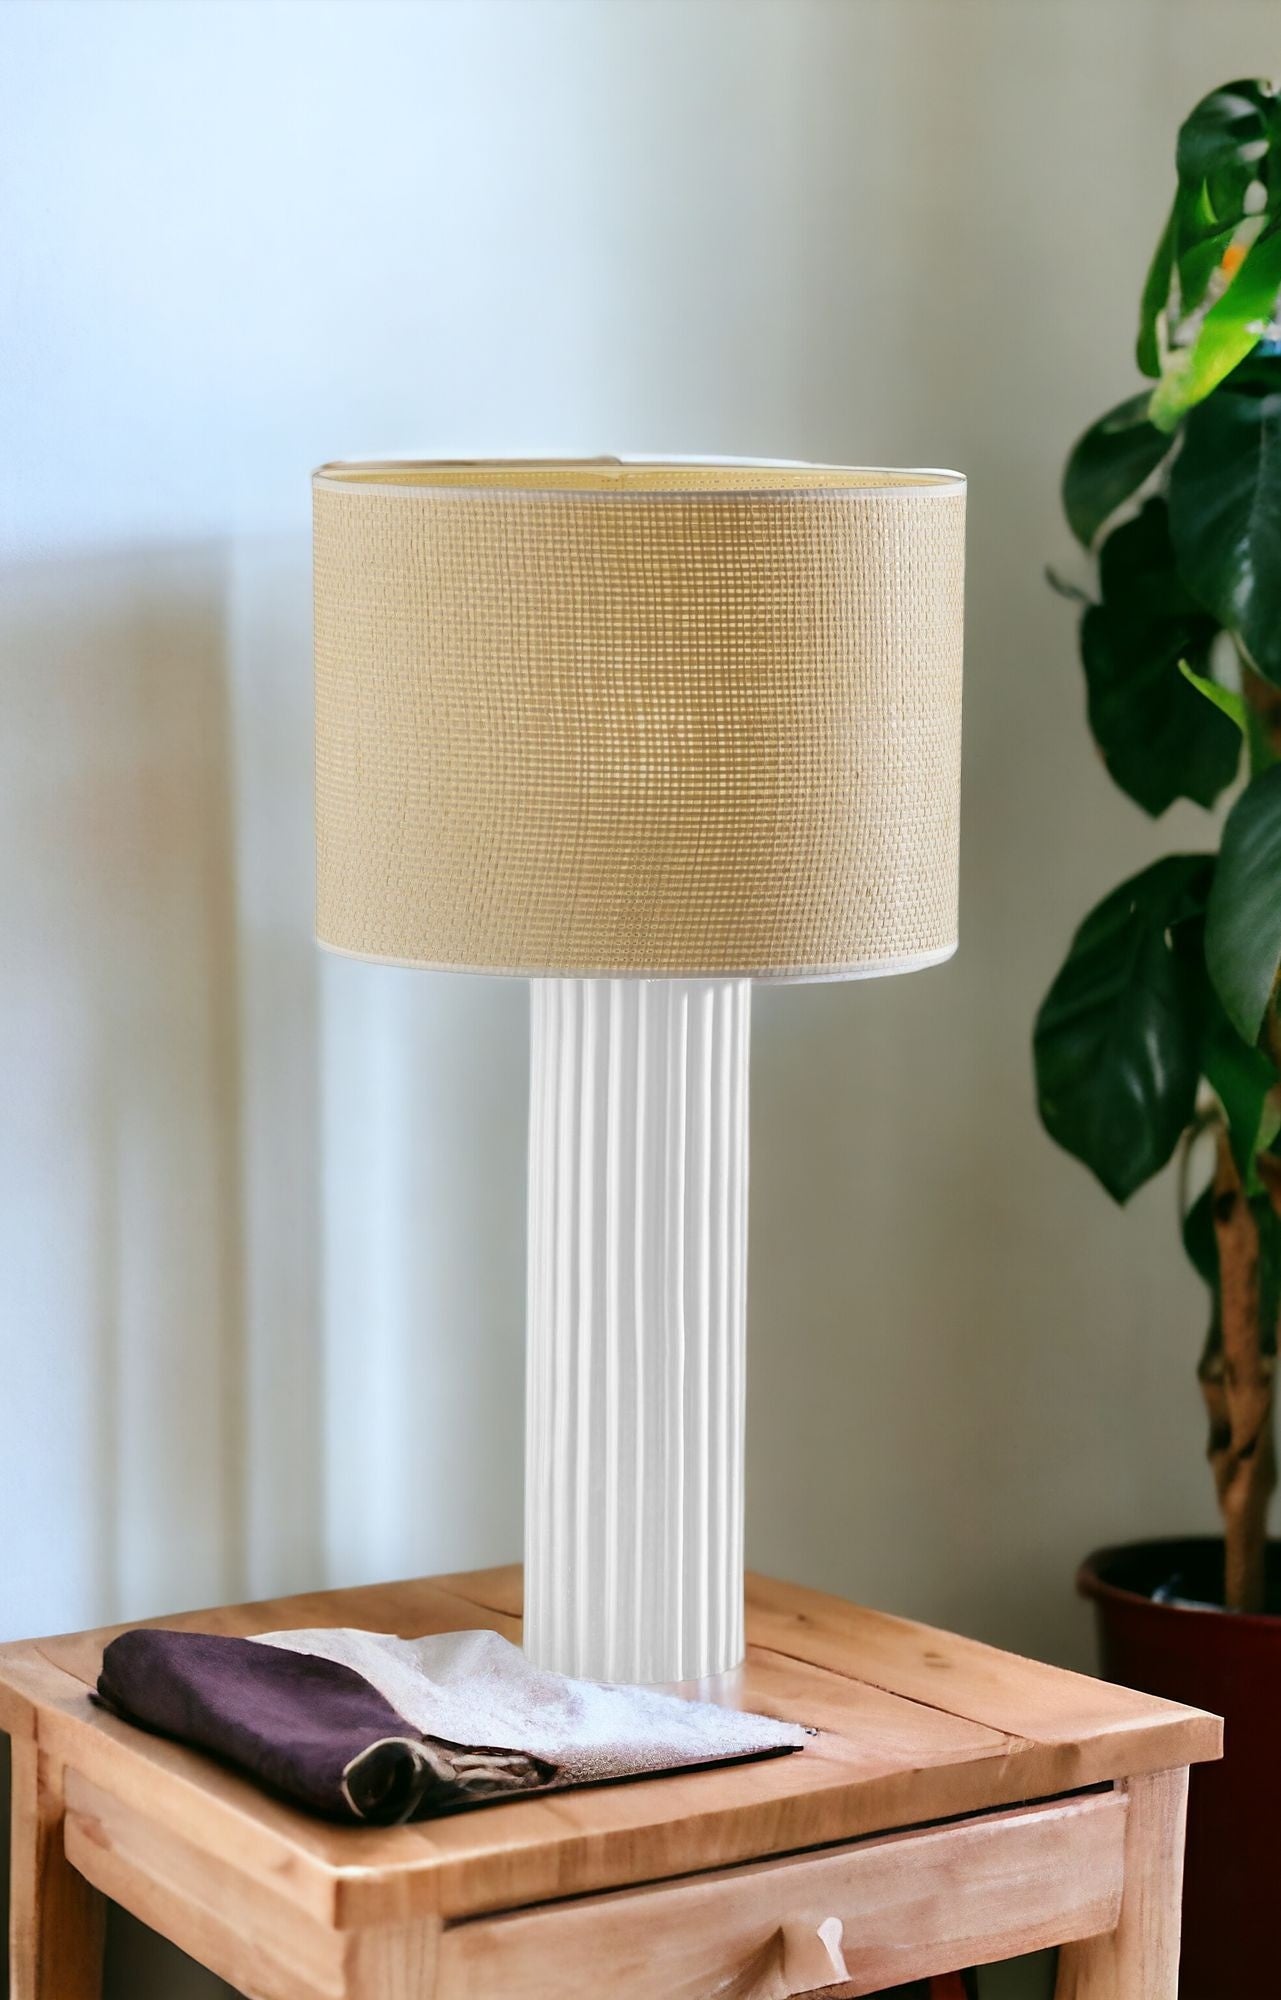 29" White Ceramic Cylinder Table Lamp With Beige Drum Shade